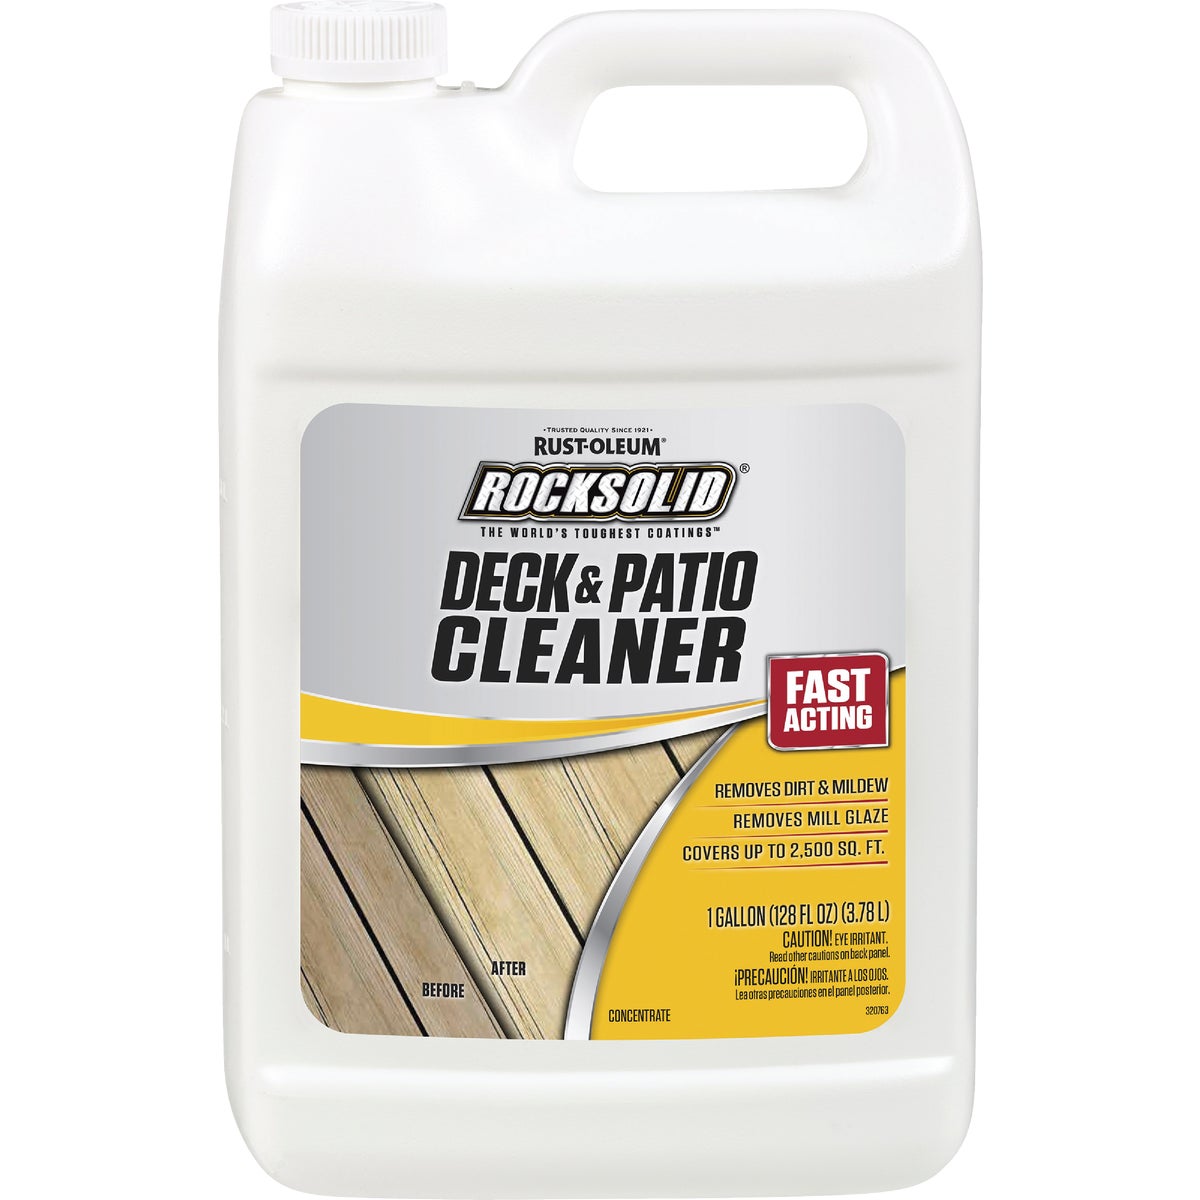 Item 770686, RockSolid Deck &amp; Patio Cleaner Concentrate quickly and safely restores 